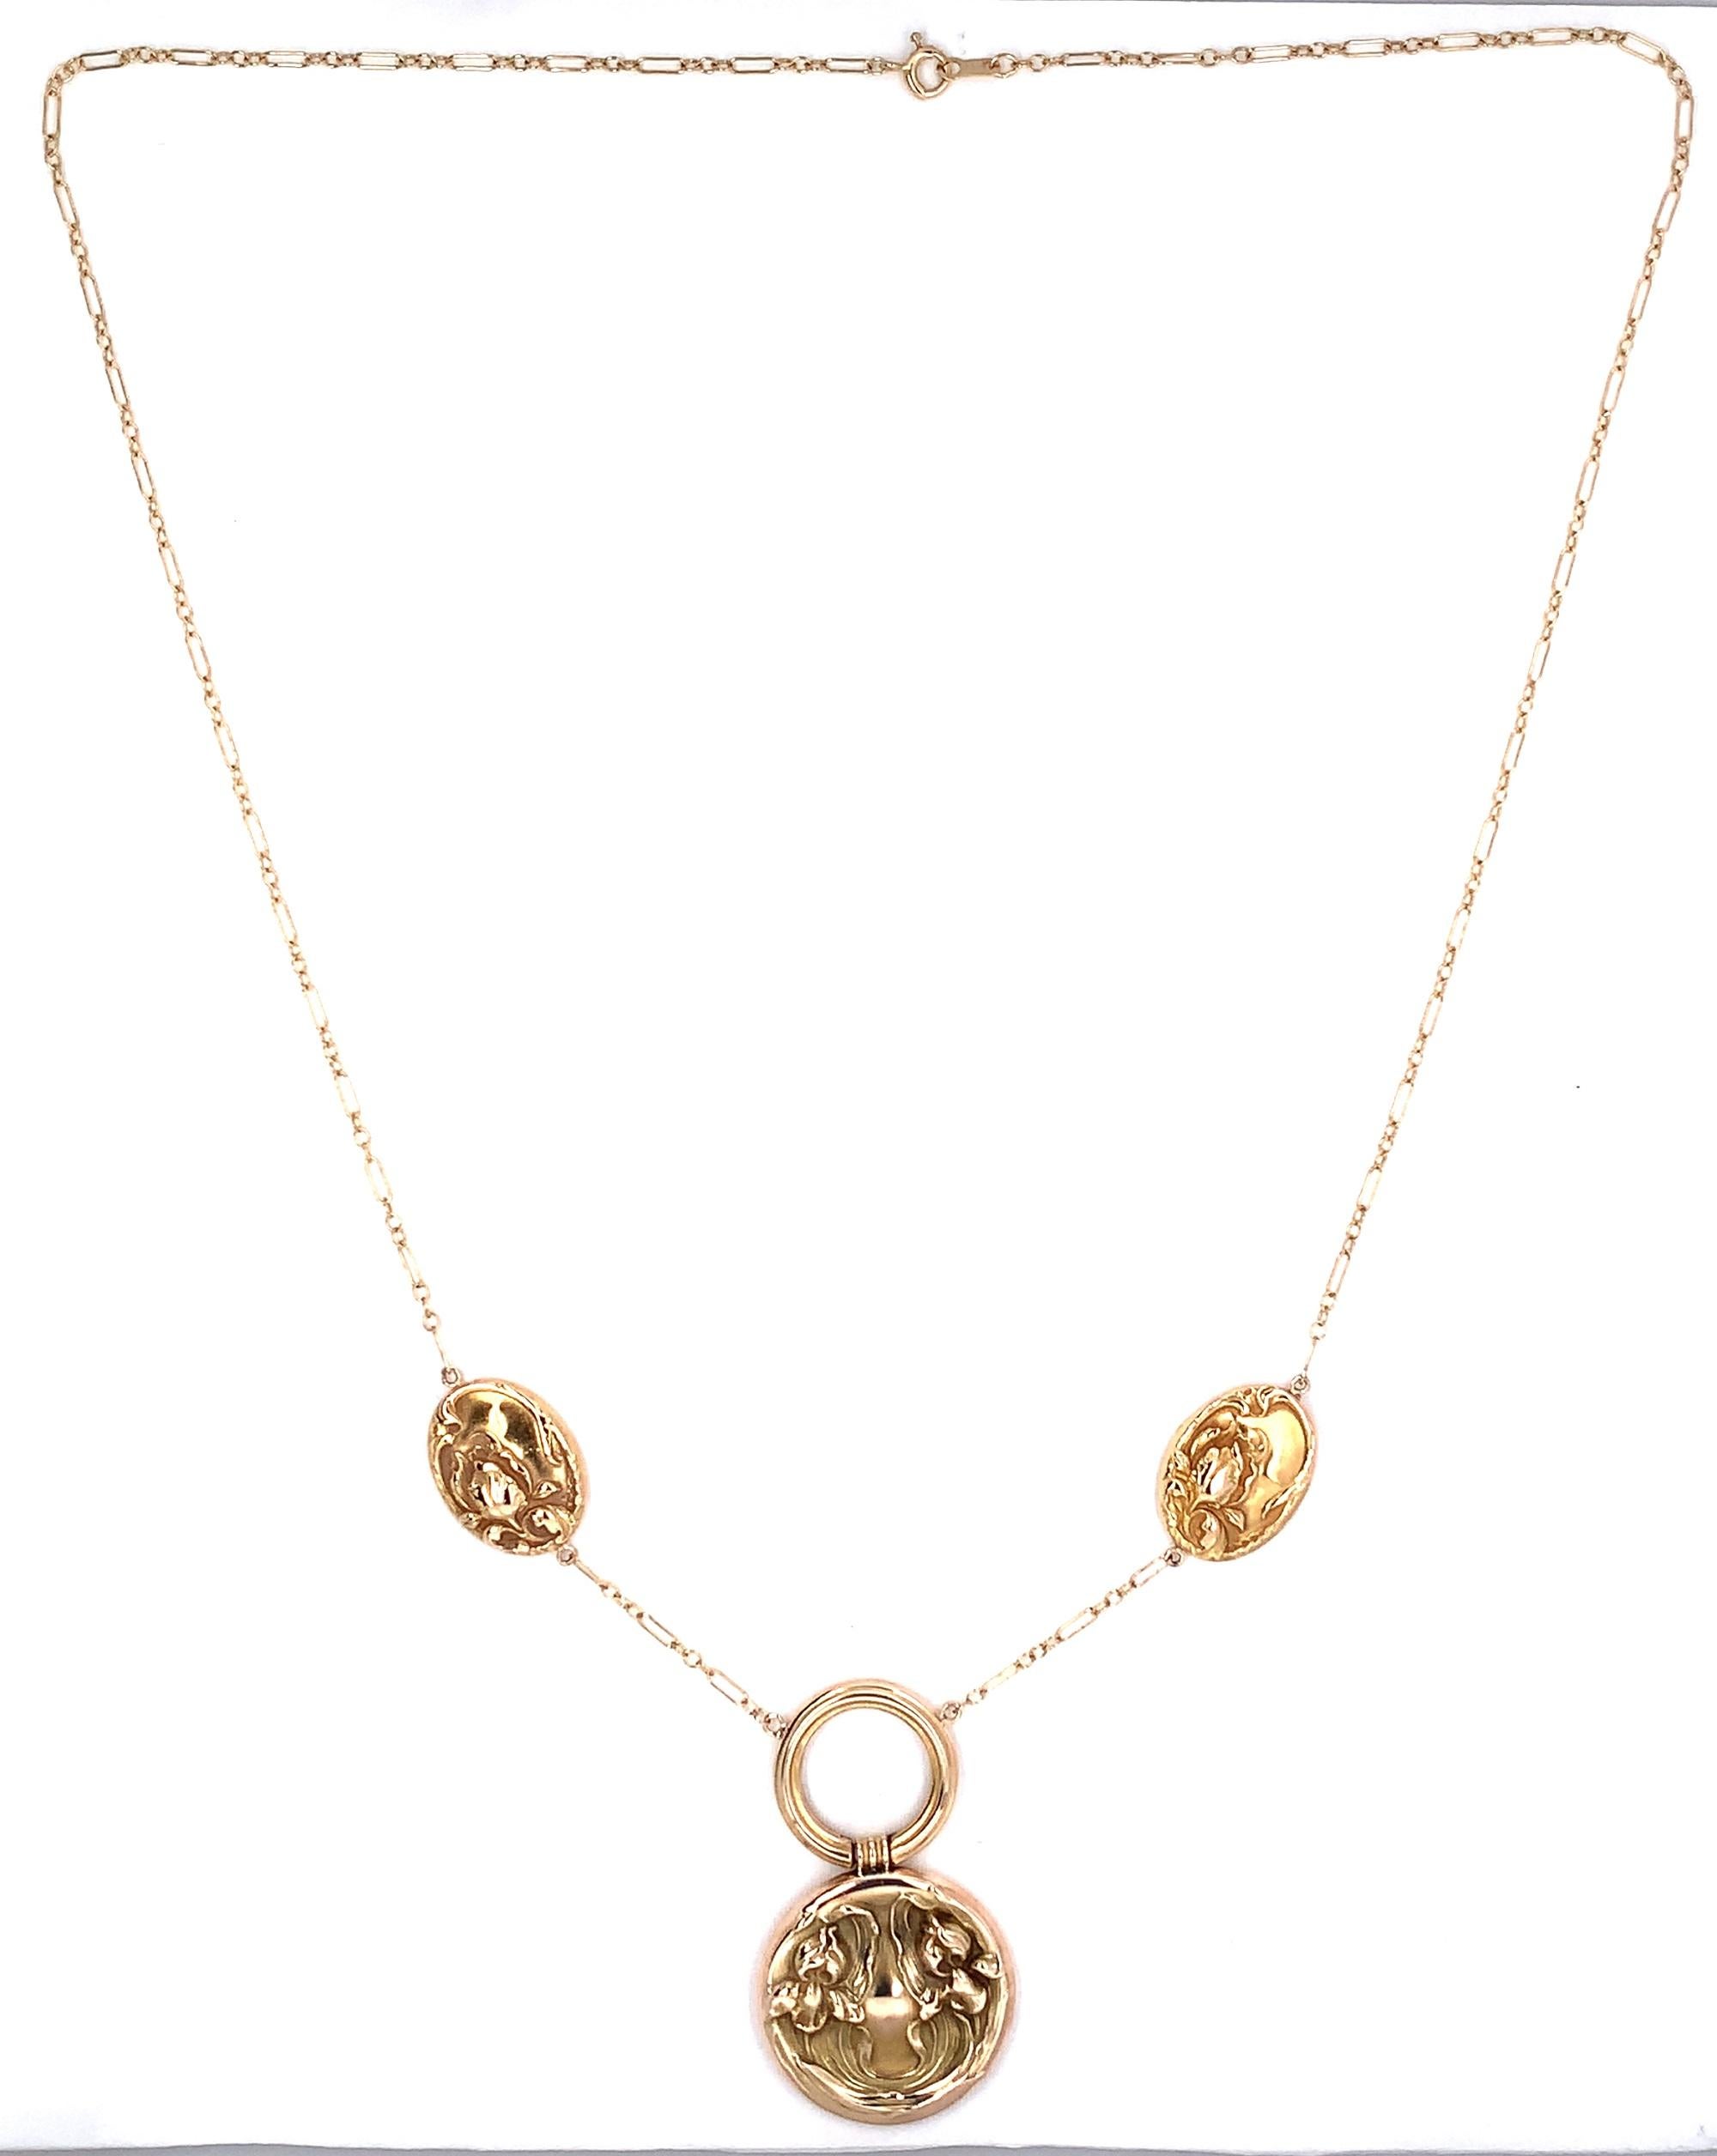 14K and 10K yellow gold Art Nouveau necklace featuring irises. The necklace measures 20